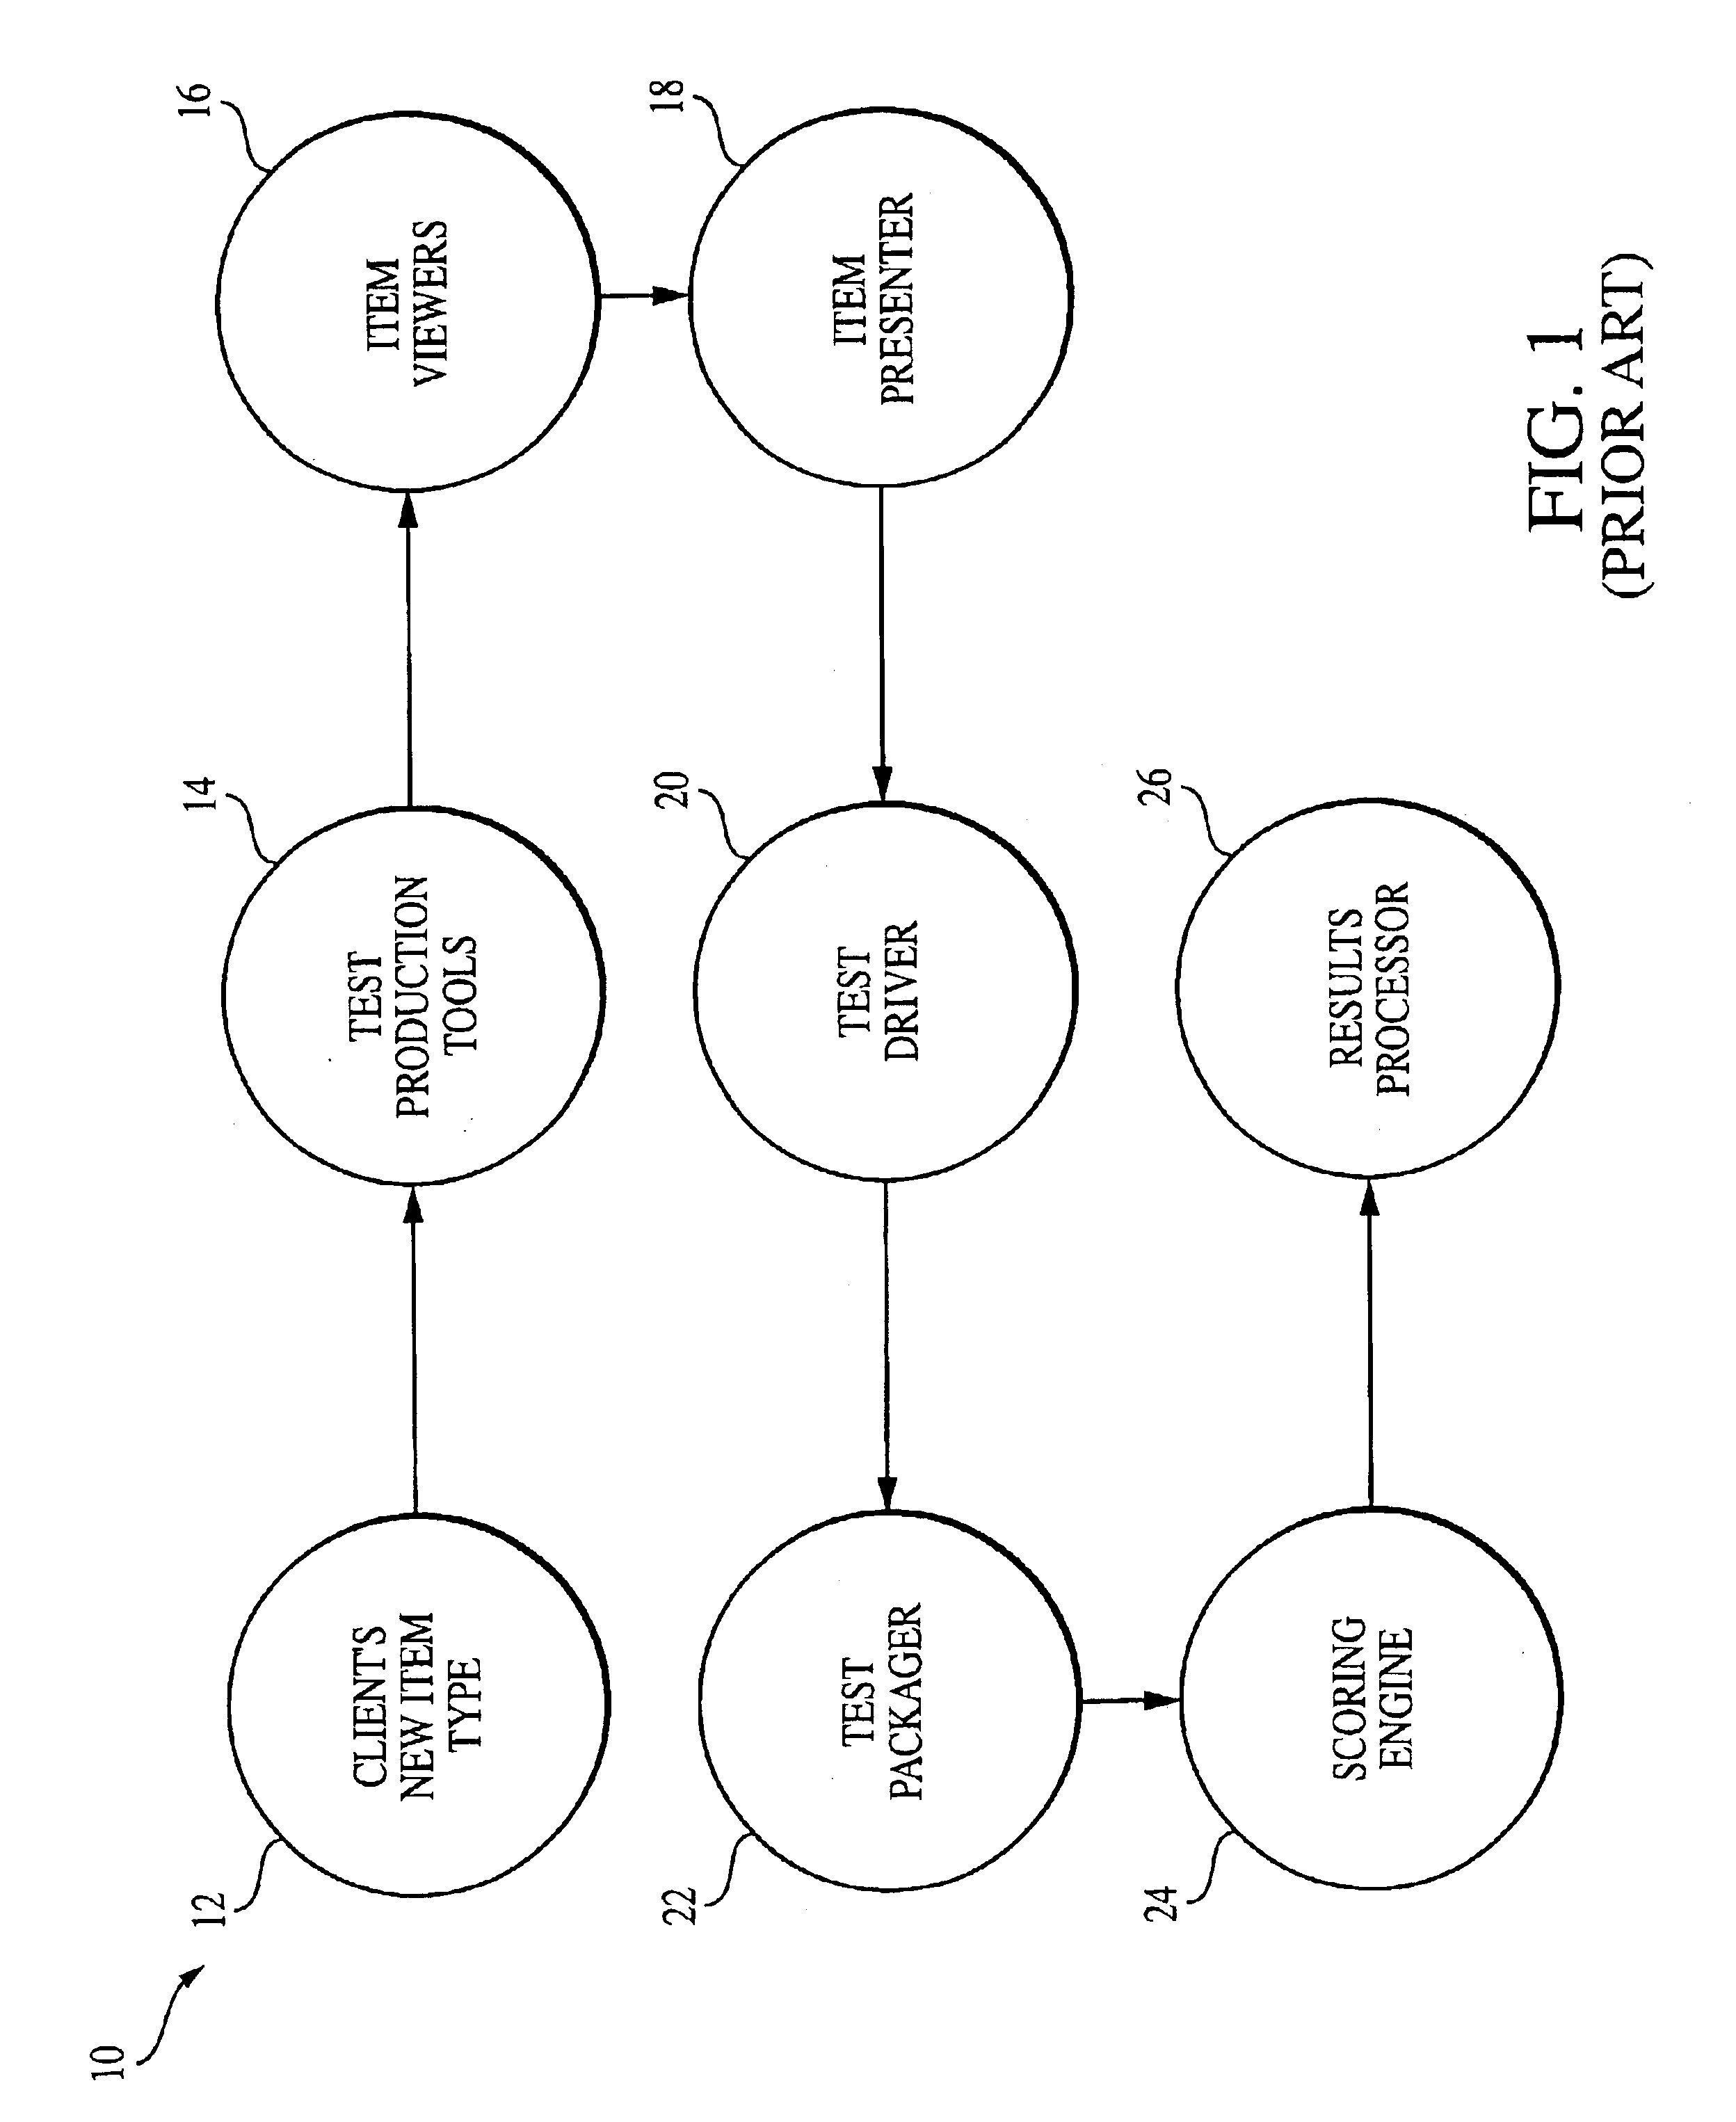 Method and system for computer based testing using an amalgamated resource file